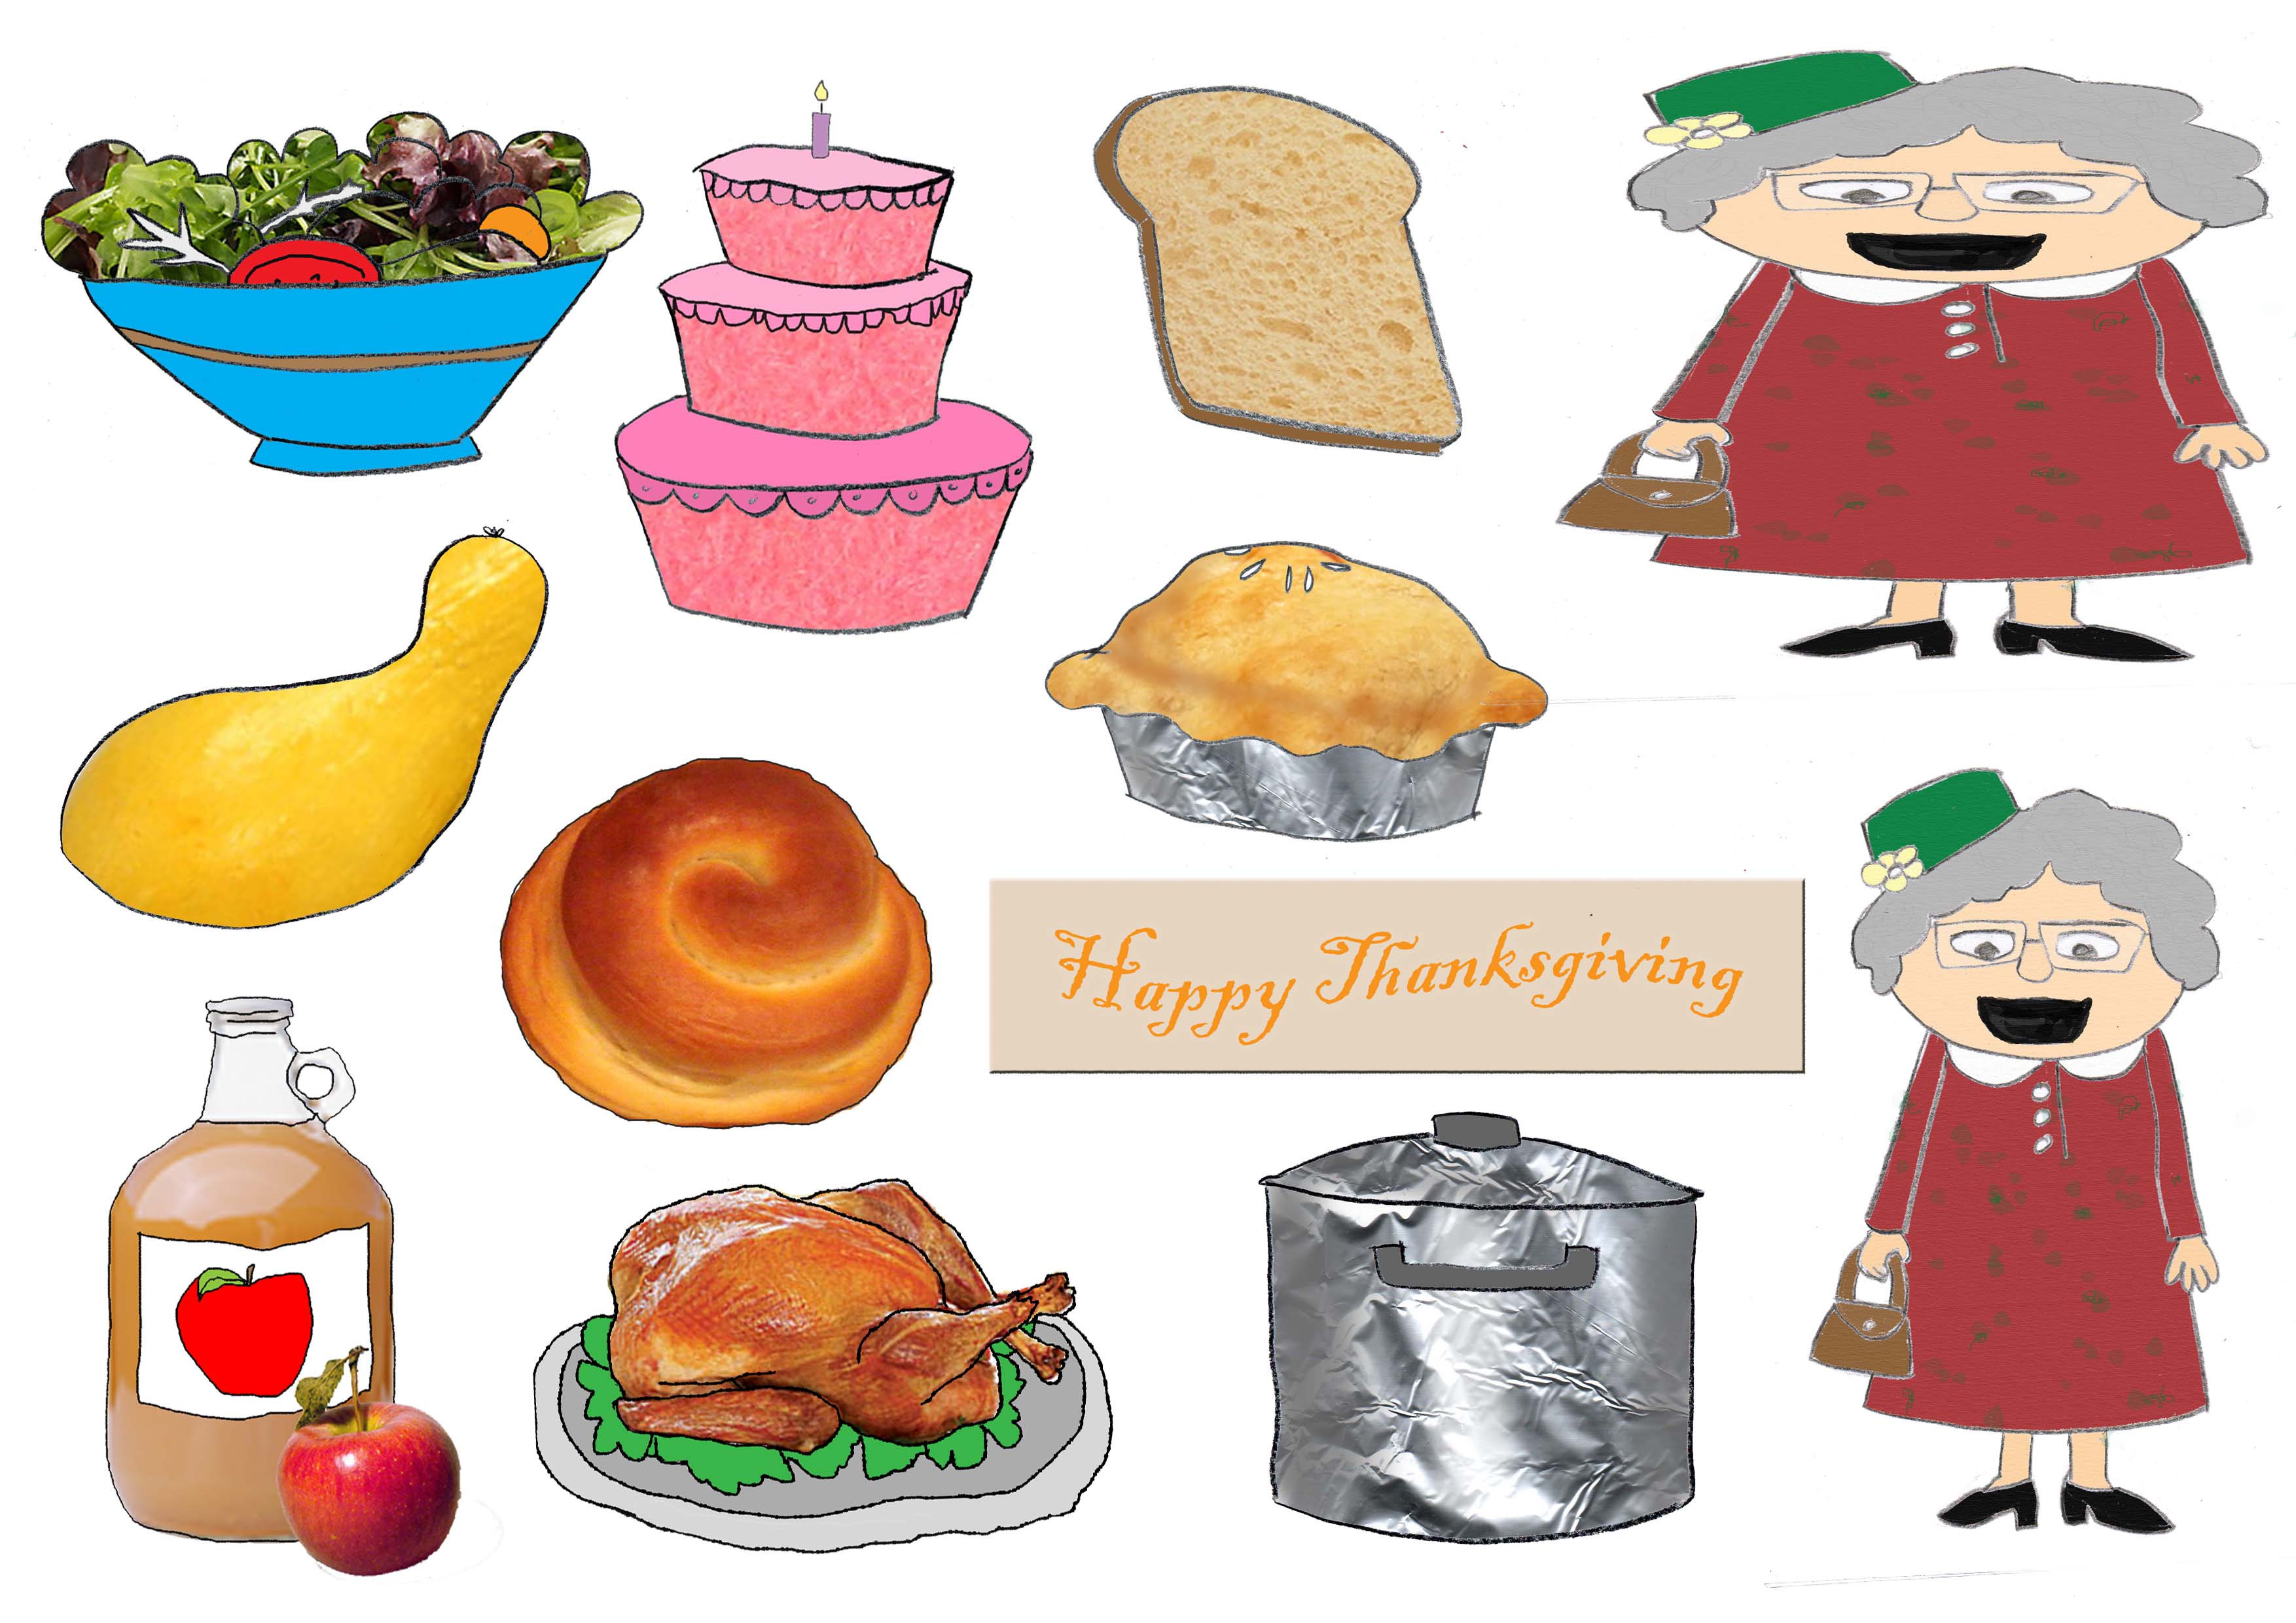 Old Lady Who Swallowed A Turkey Clipart.